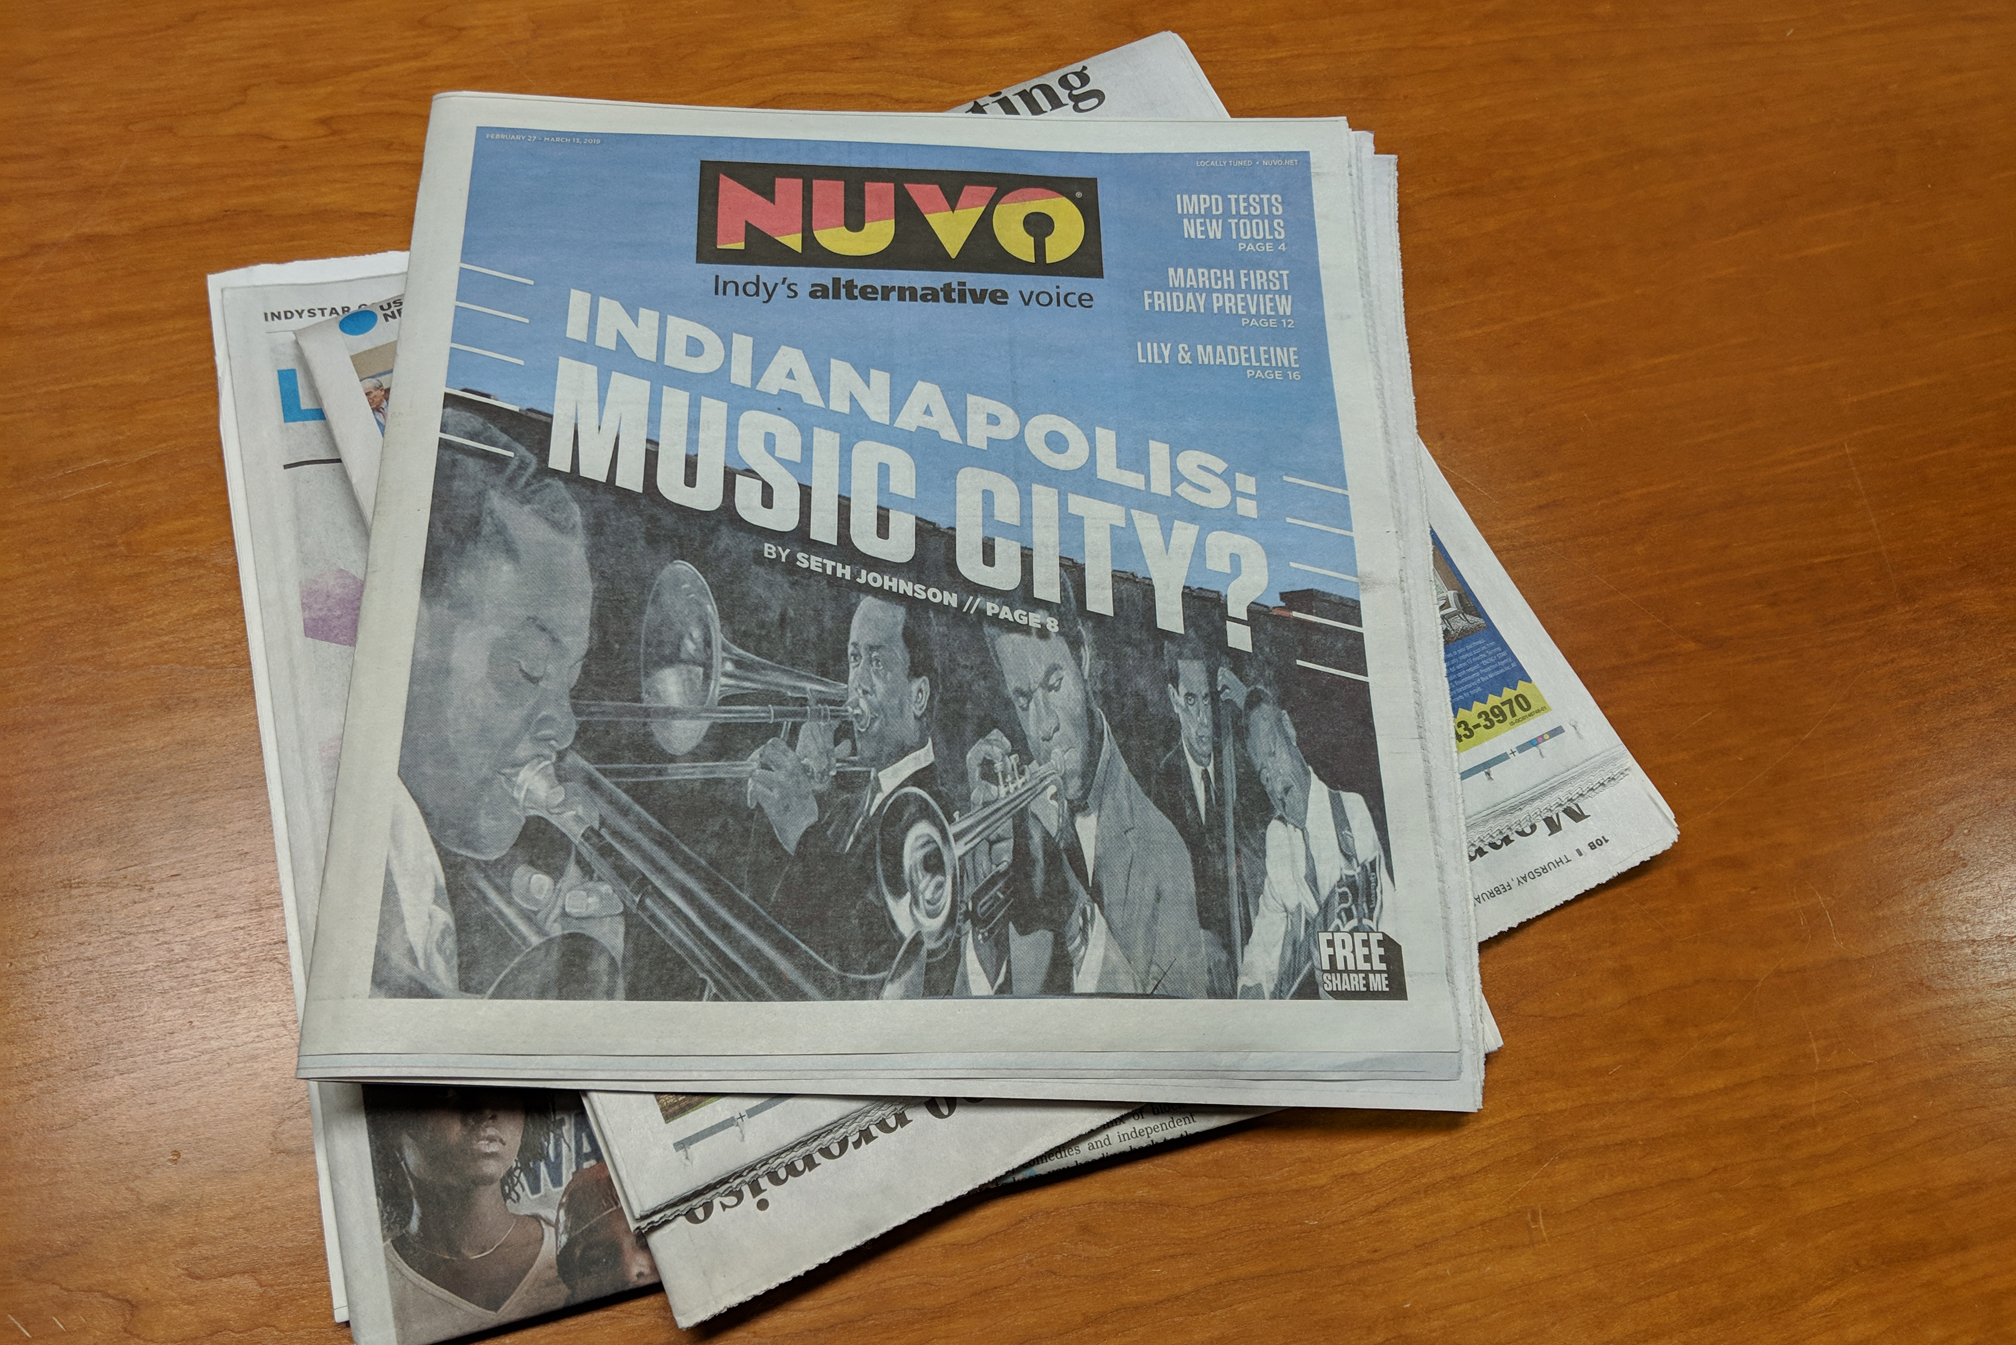 A printed copy of NUVO on a table